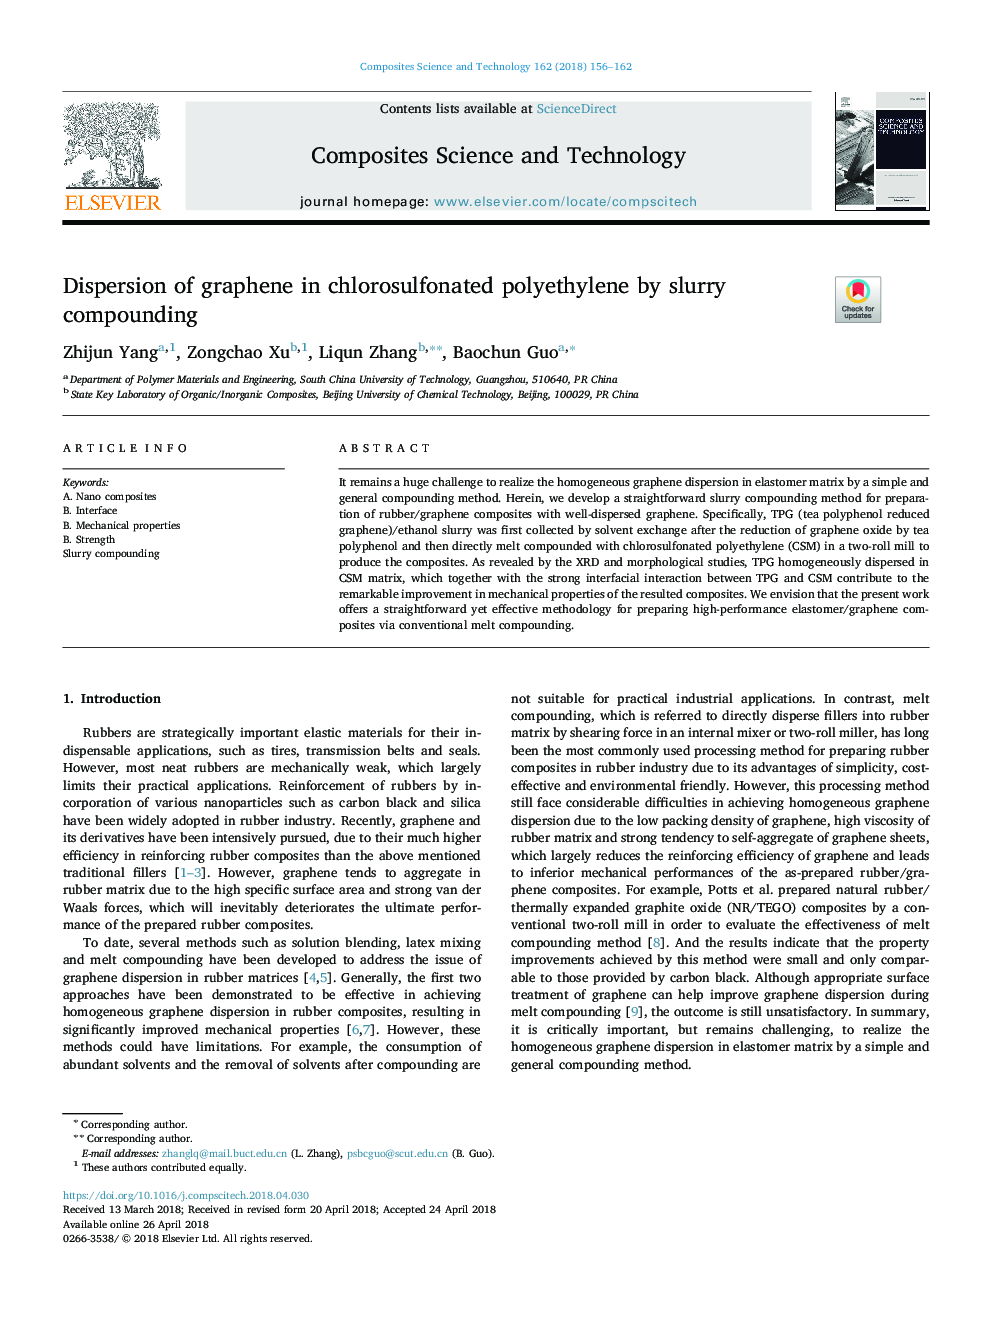 Dispersion of graphene in chlorosulfonated polyethylene by slurry compounding